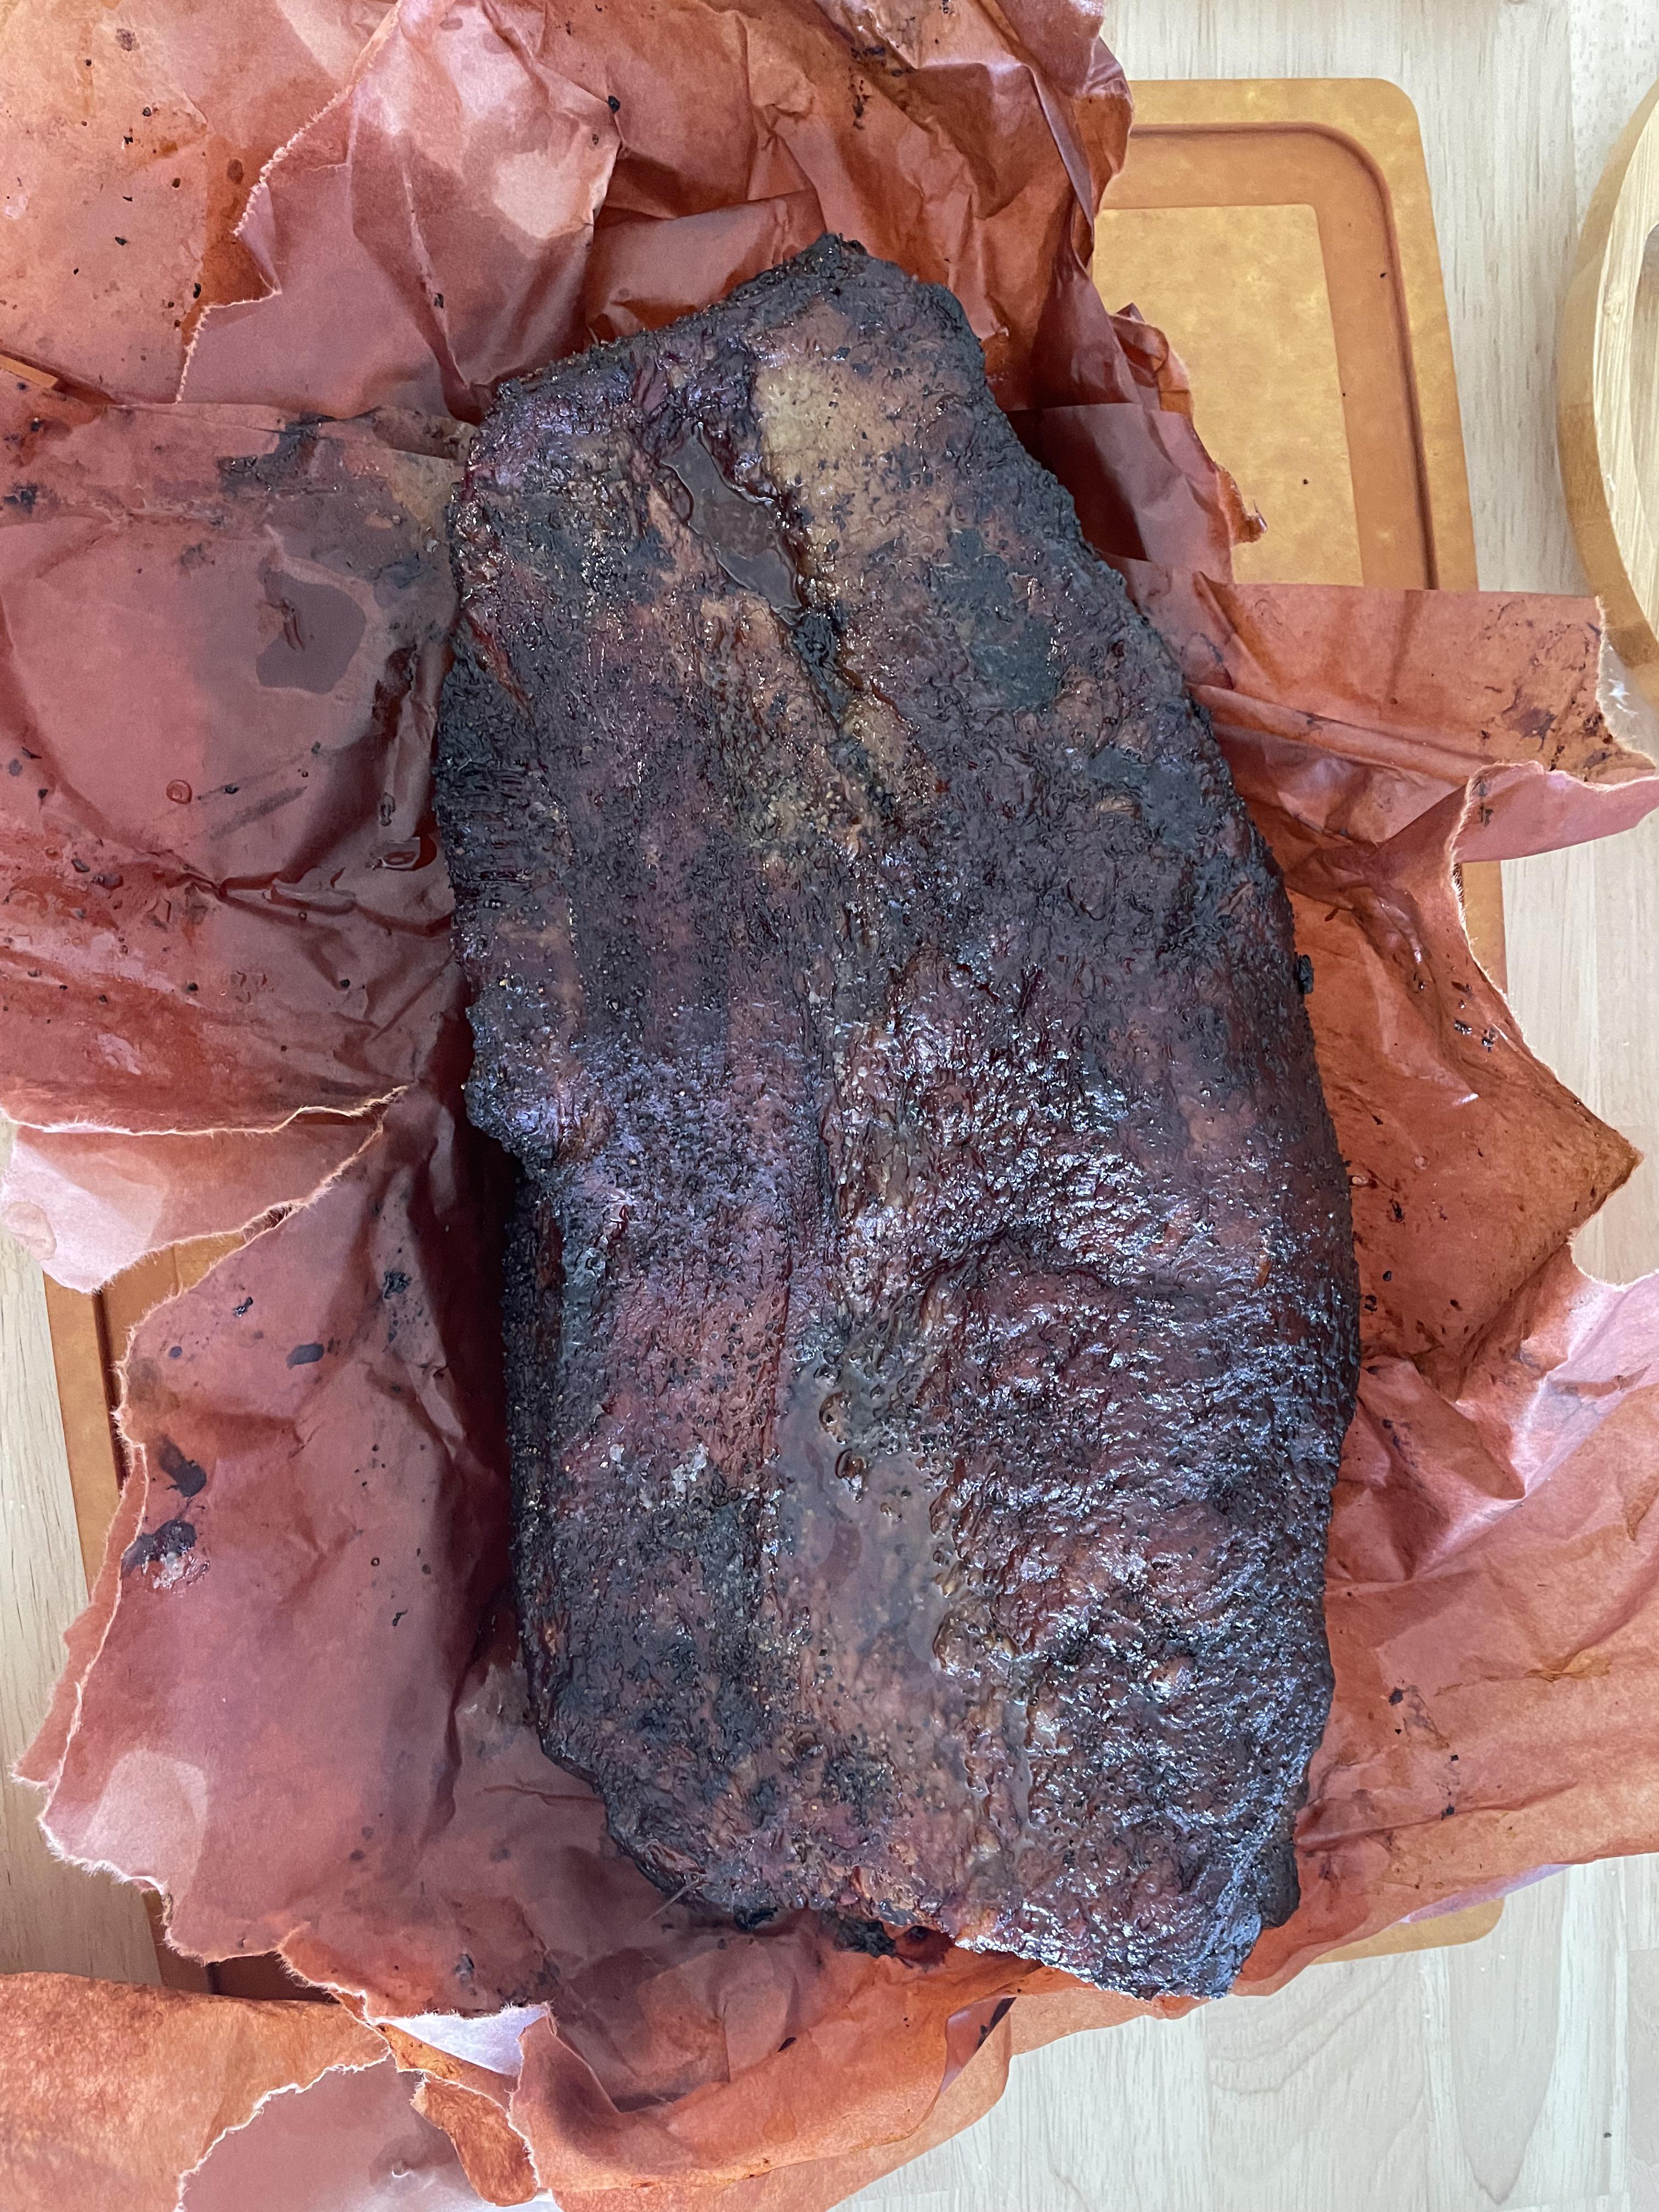 Why Is My Brisket Tough: Troubleshooting Brisket Woes